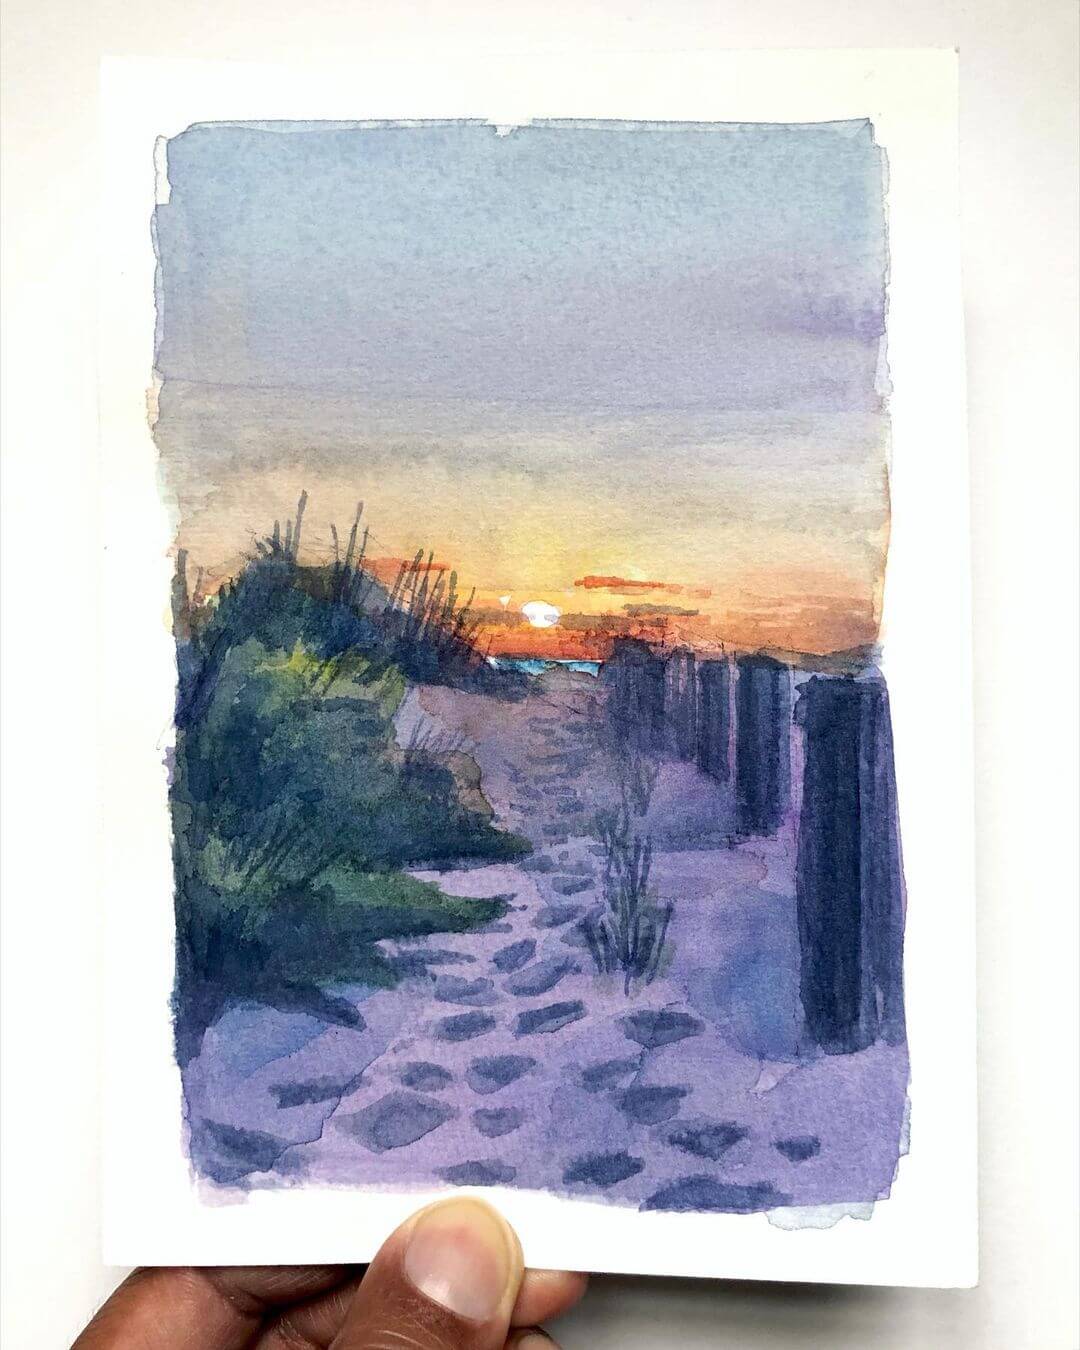 A hand holding a sketch book with a completed beach at sunset painted in watercolours.